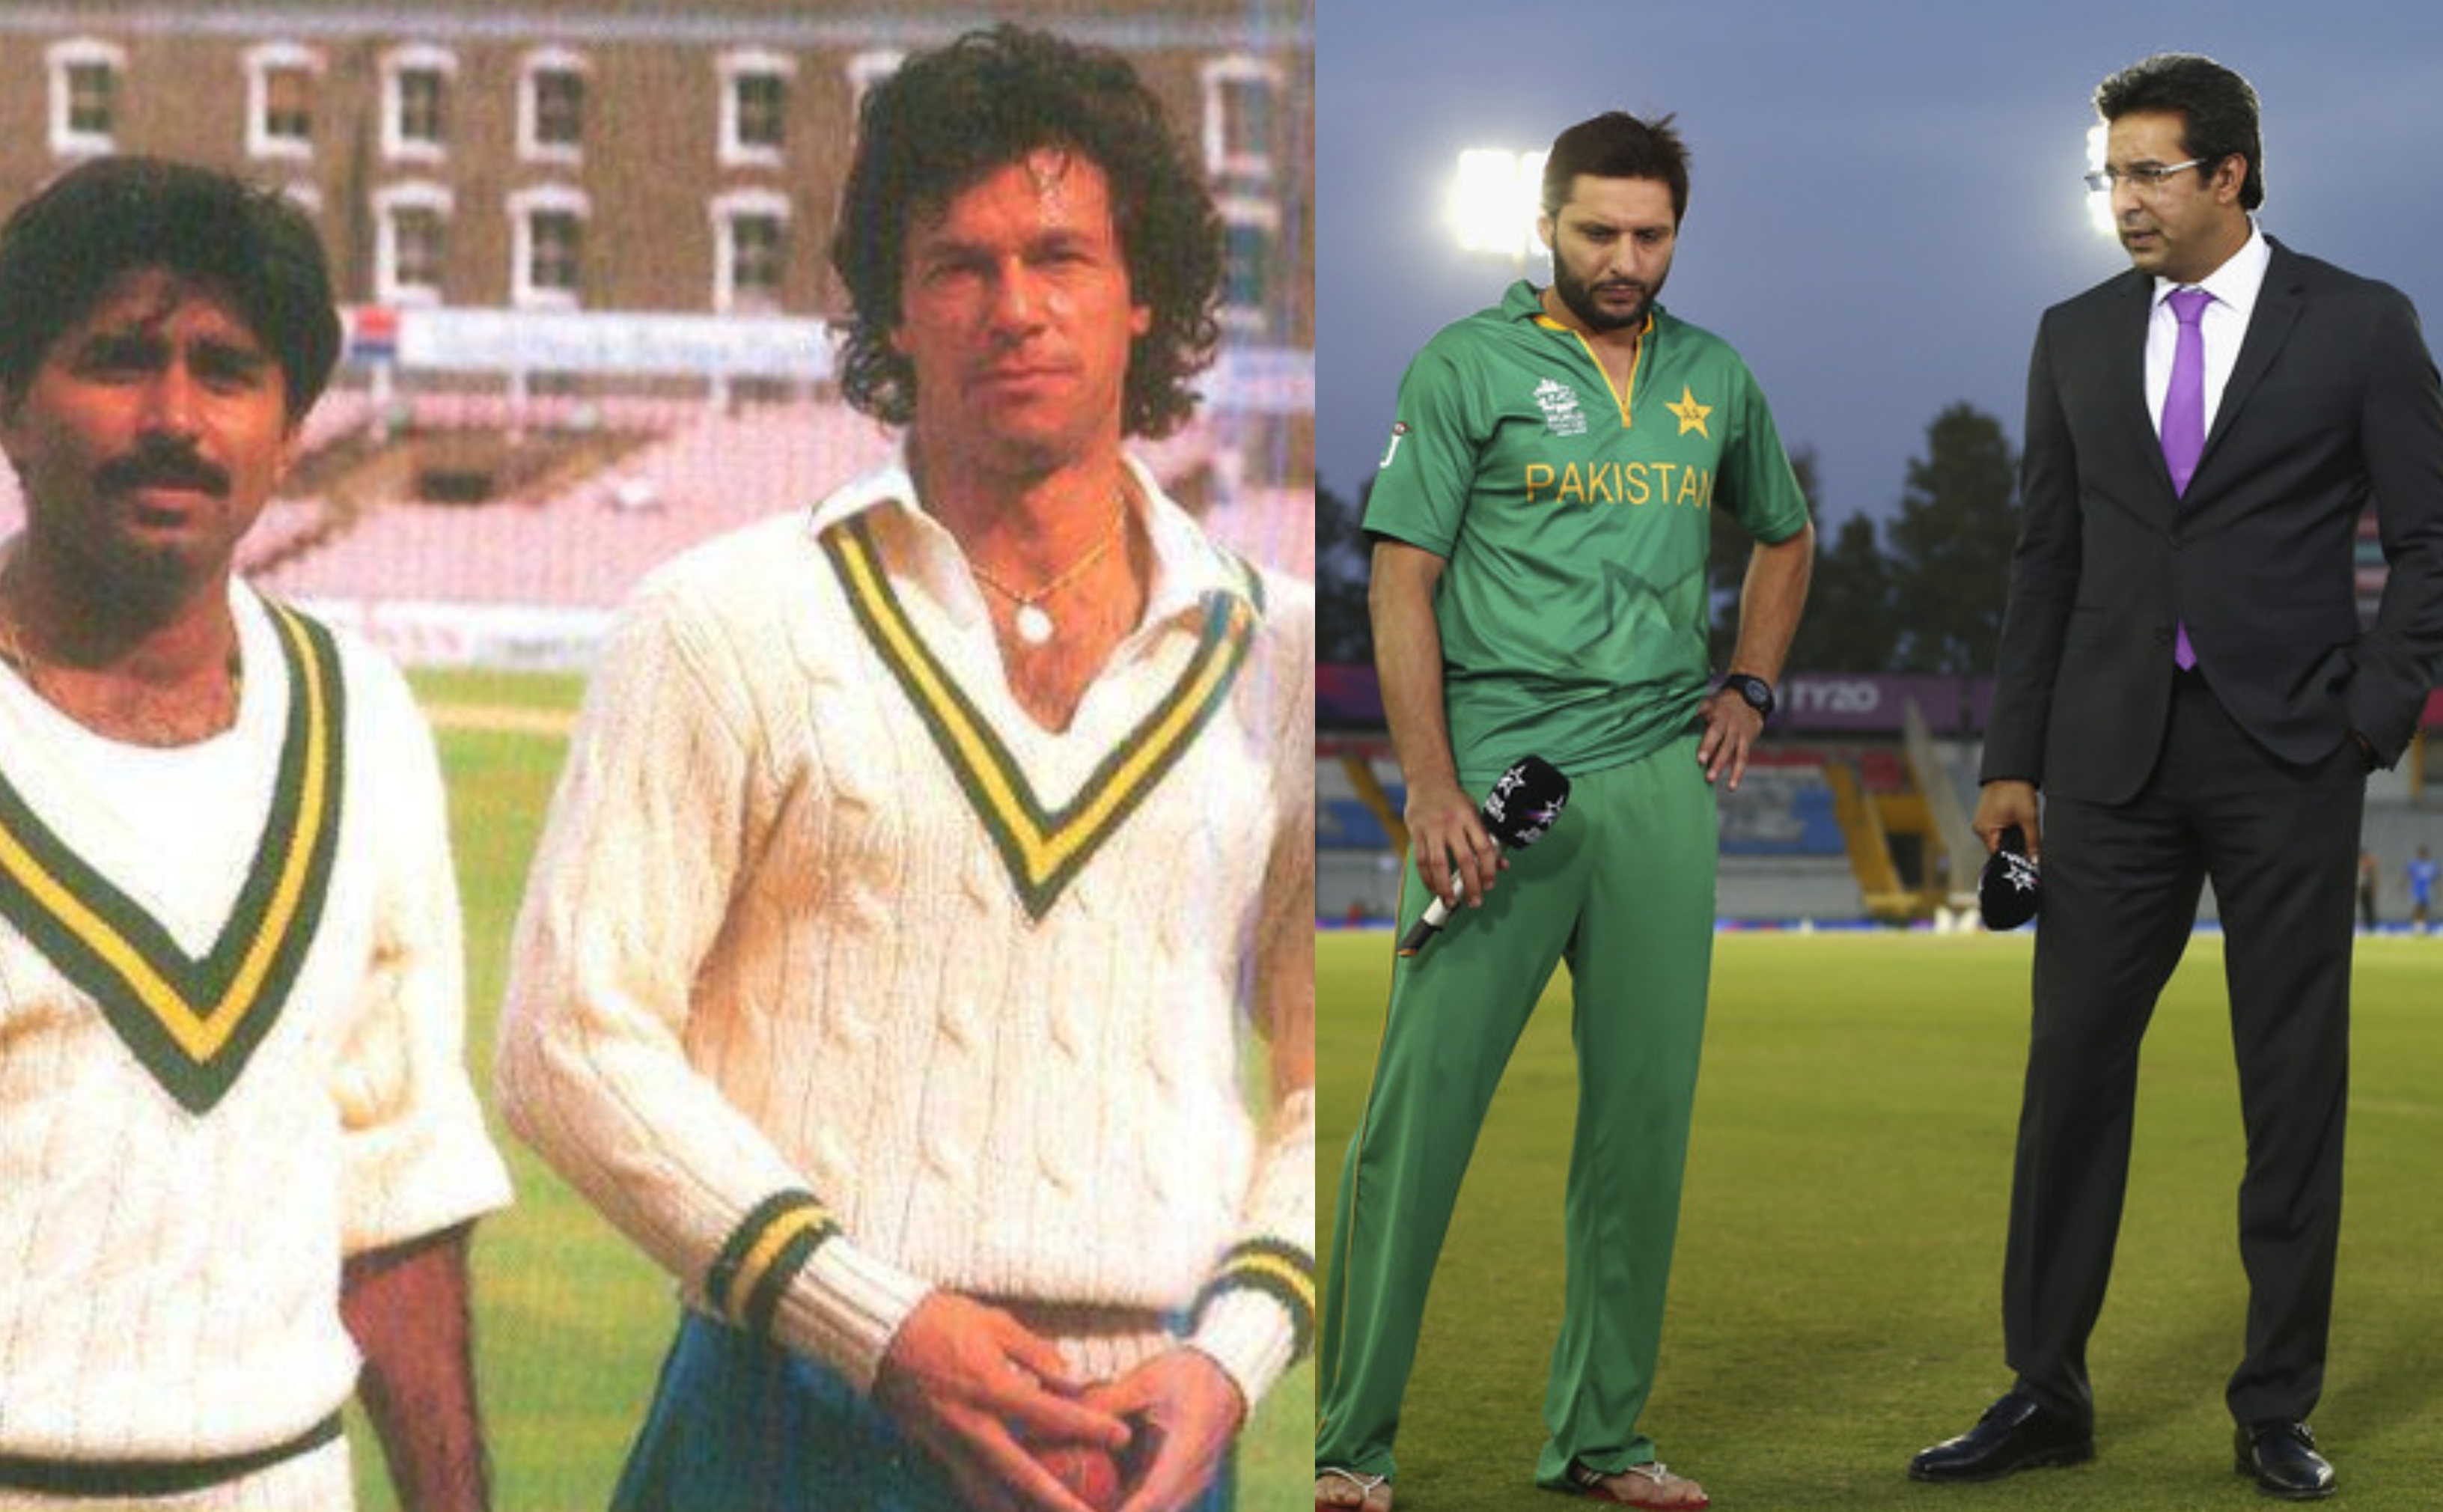 Photos of Imran, Javed, Wasim and Afridi have been removed from the Mohali Stadium